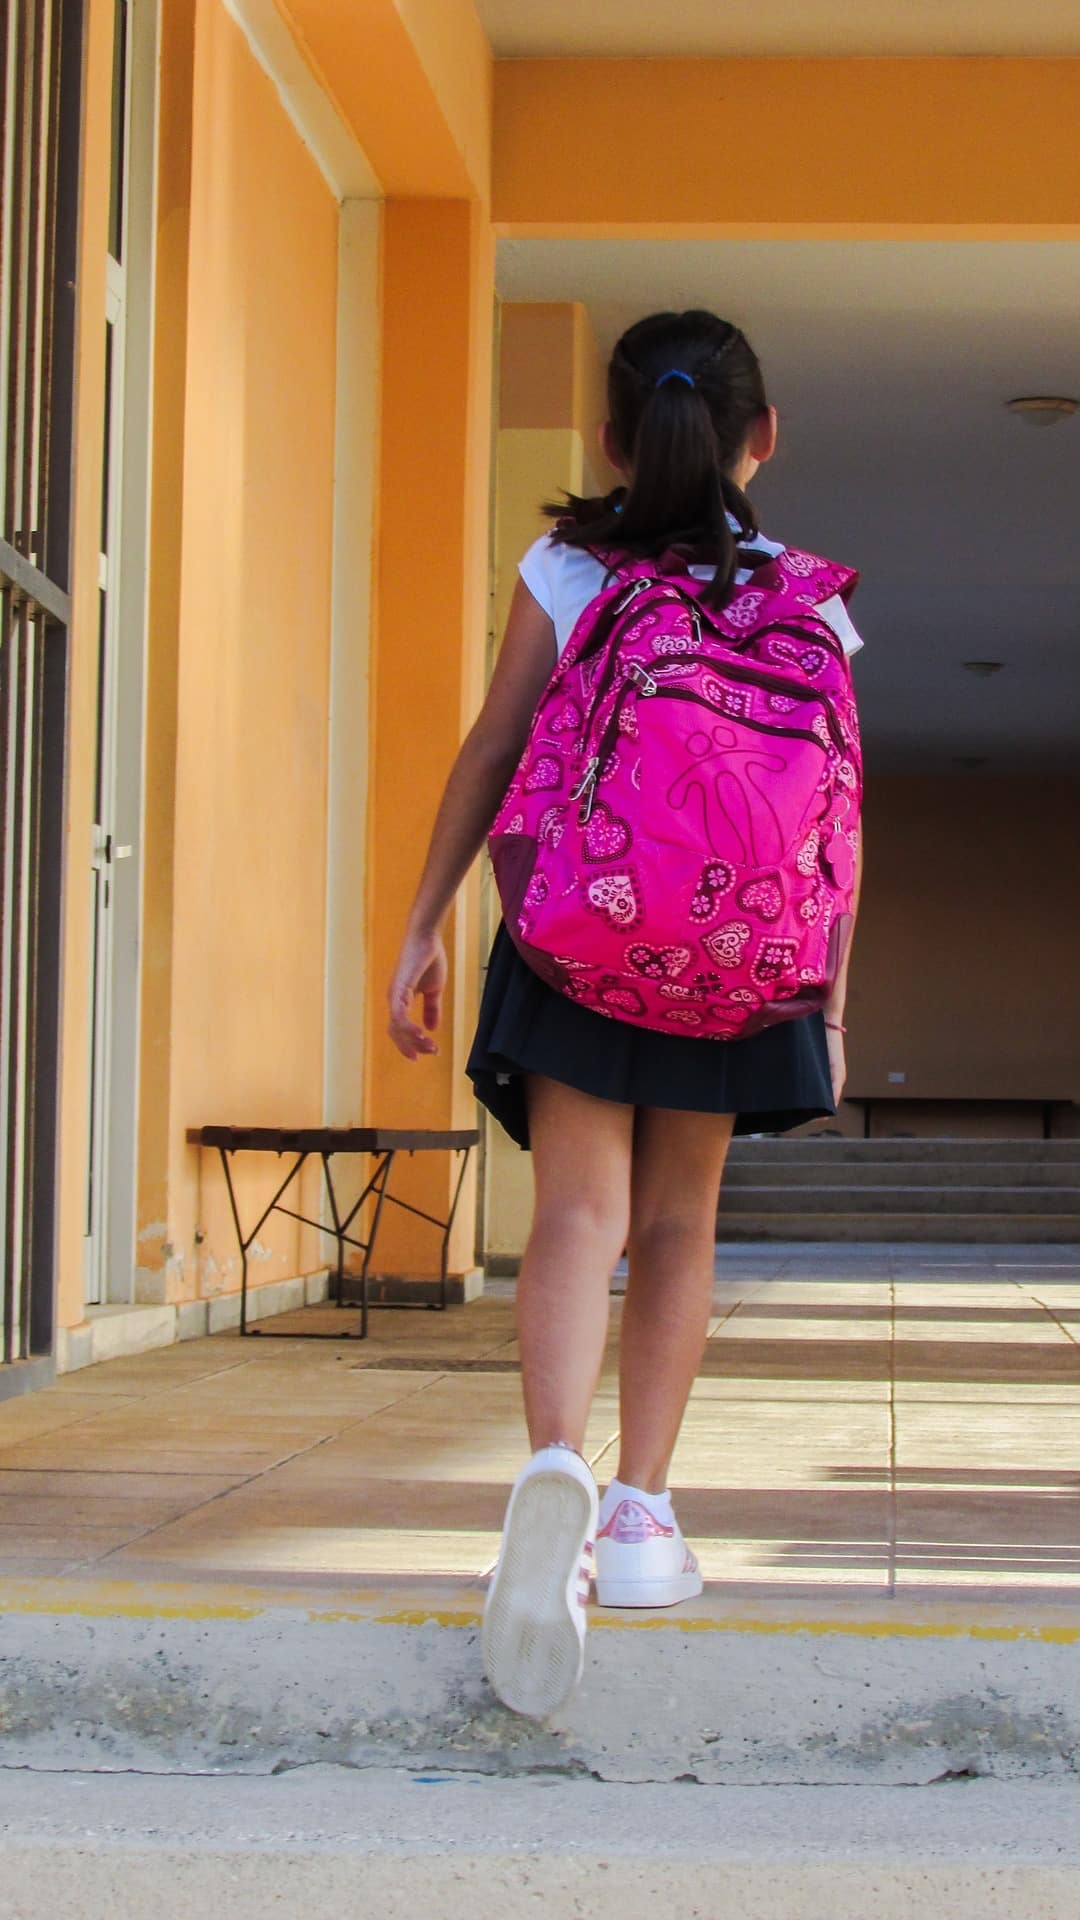 school bags interfere with the child's spine